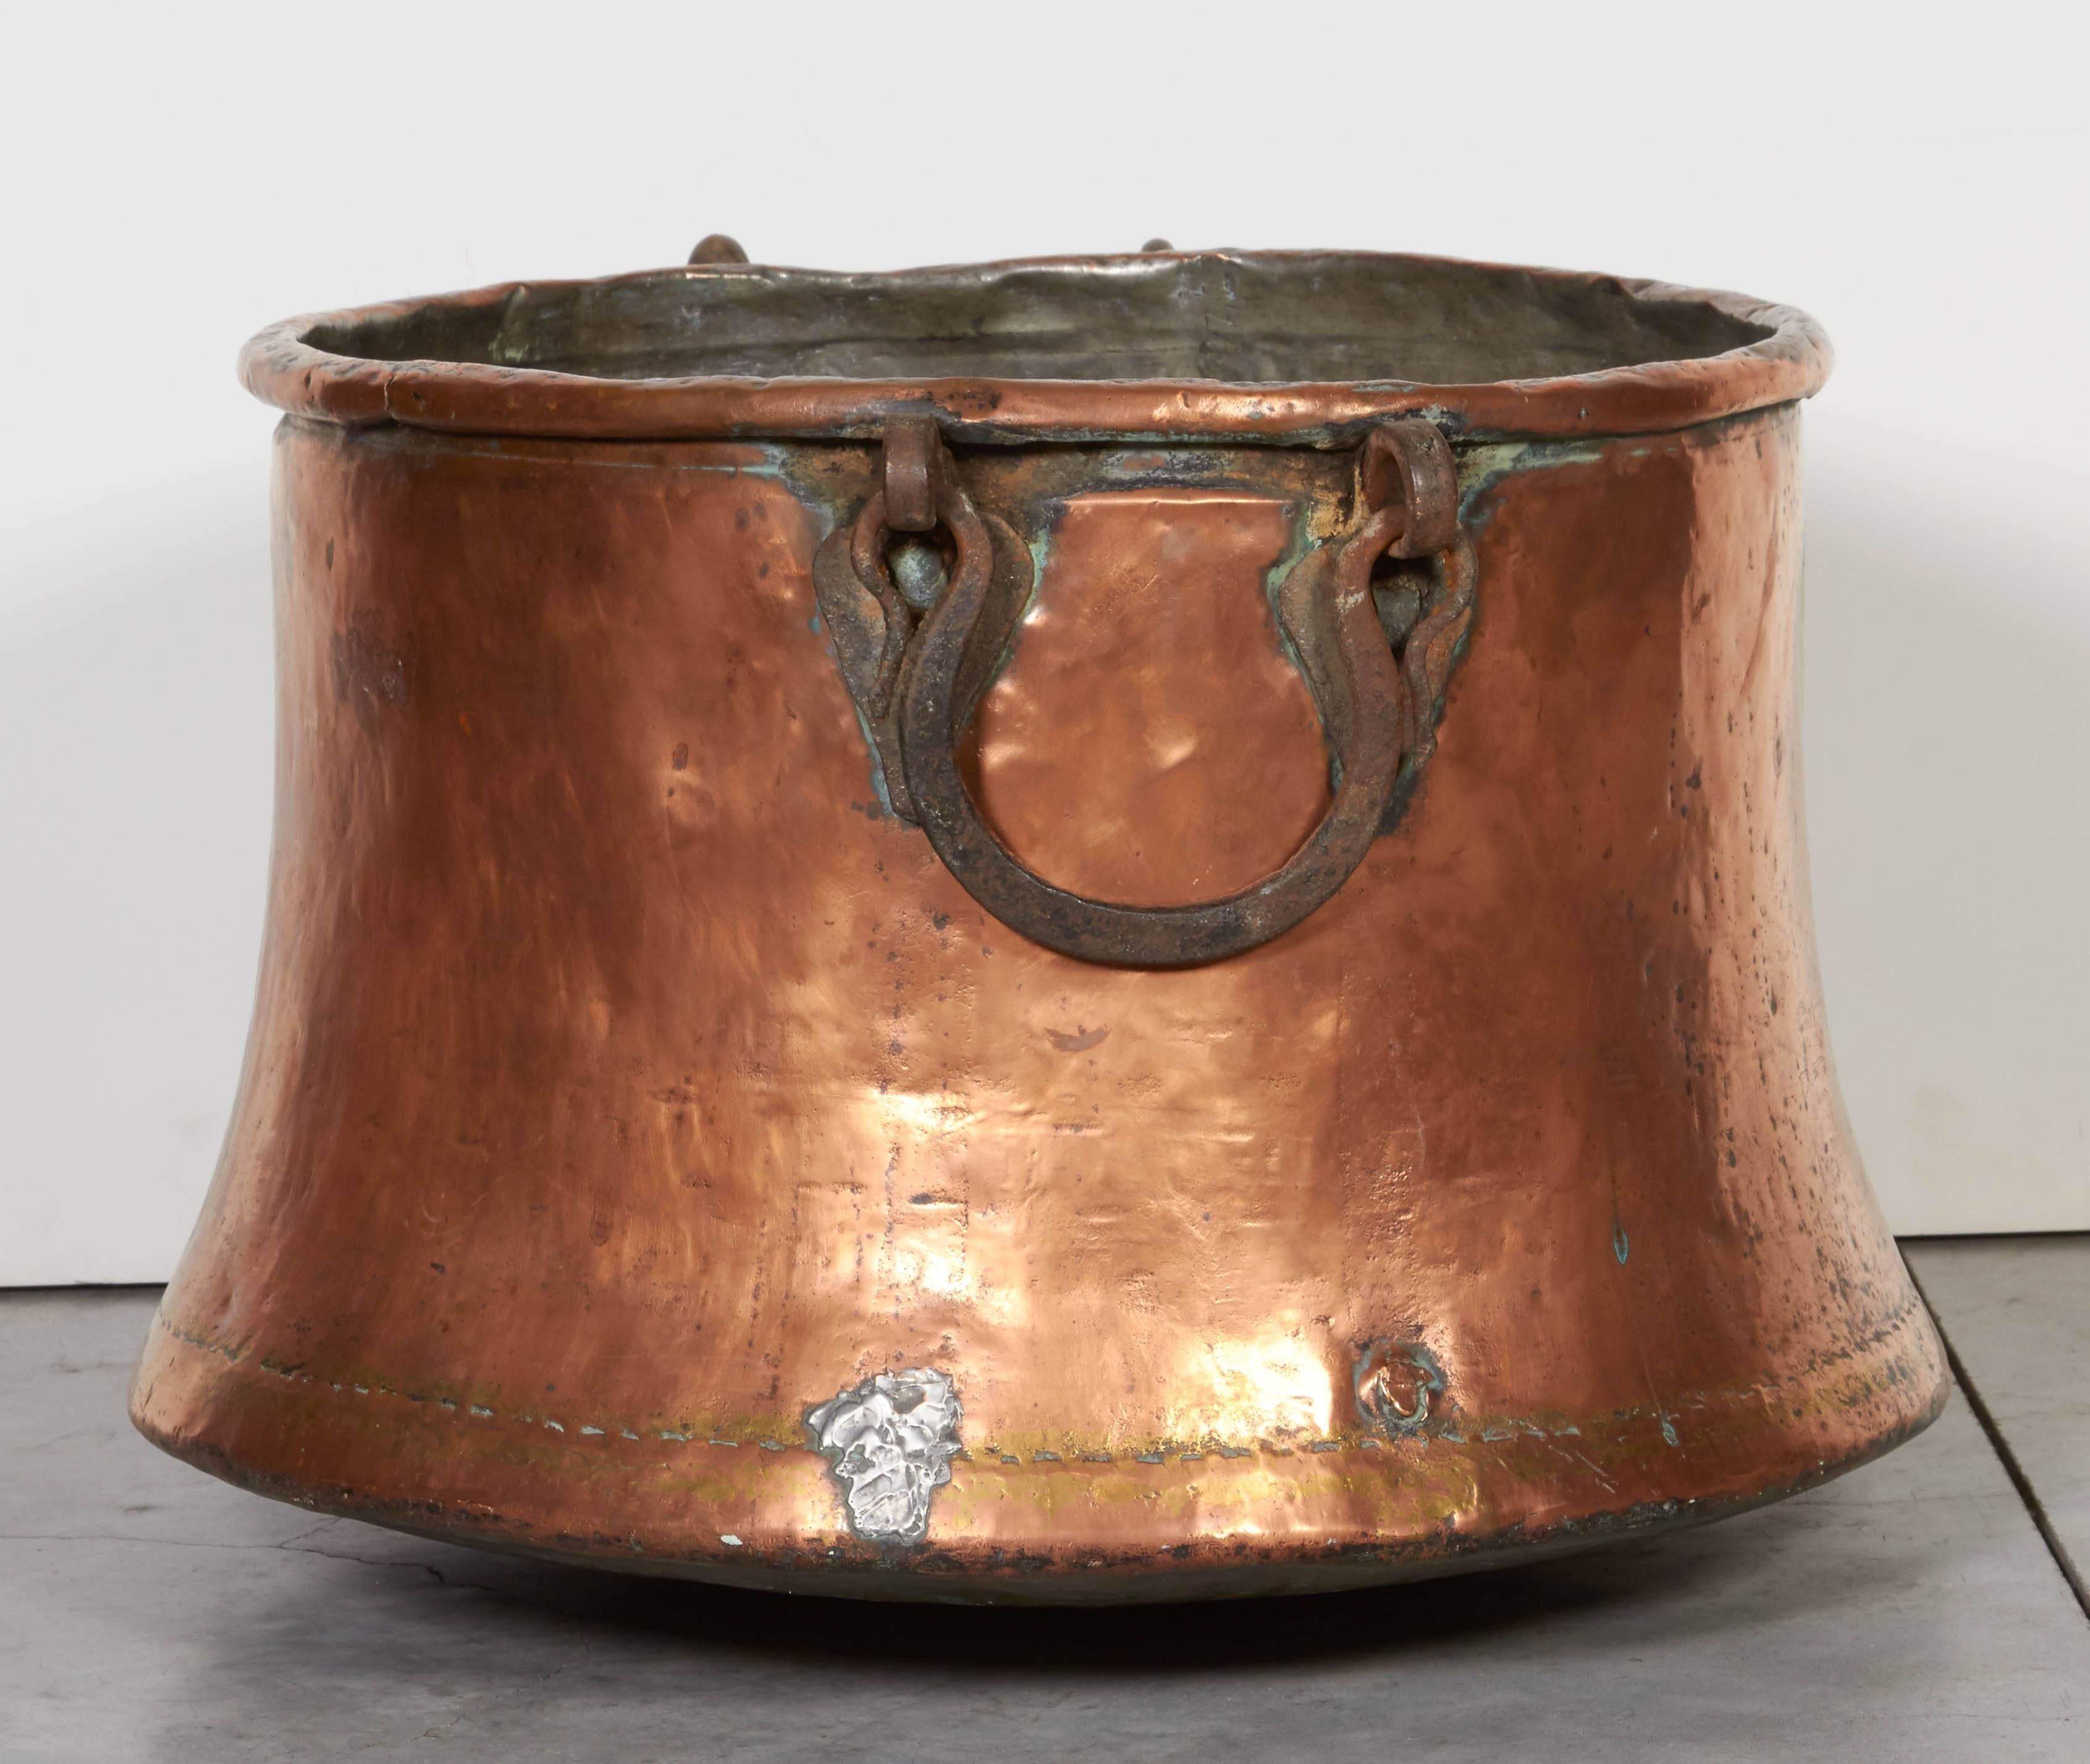 A large antique, tin lined joined copper kettle with a graceful flared base and beautifully hand-forged heavy iron handles. This striking pot has an unusually beautiful patina featuring several old repairs. A wonderful rustic vessel for firewood,